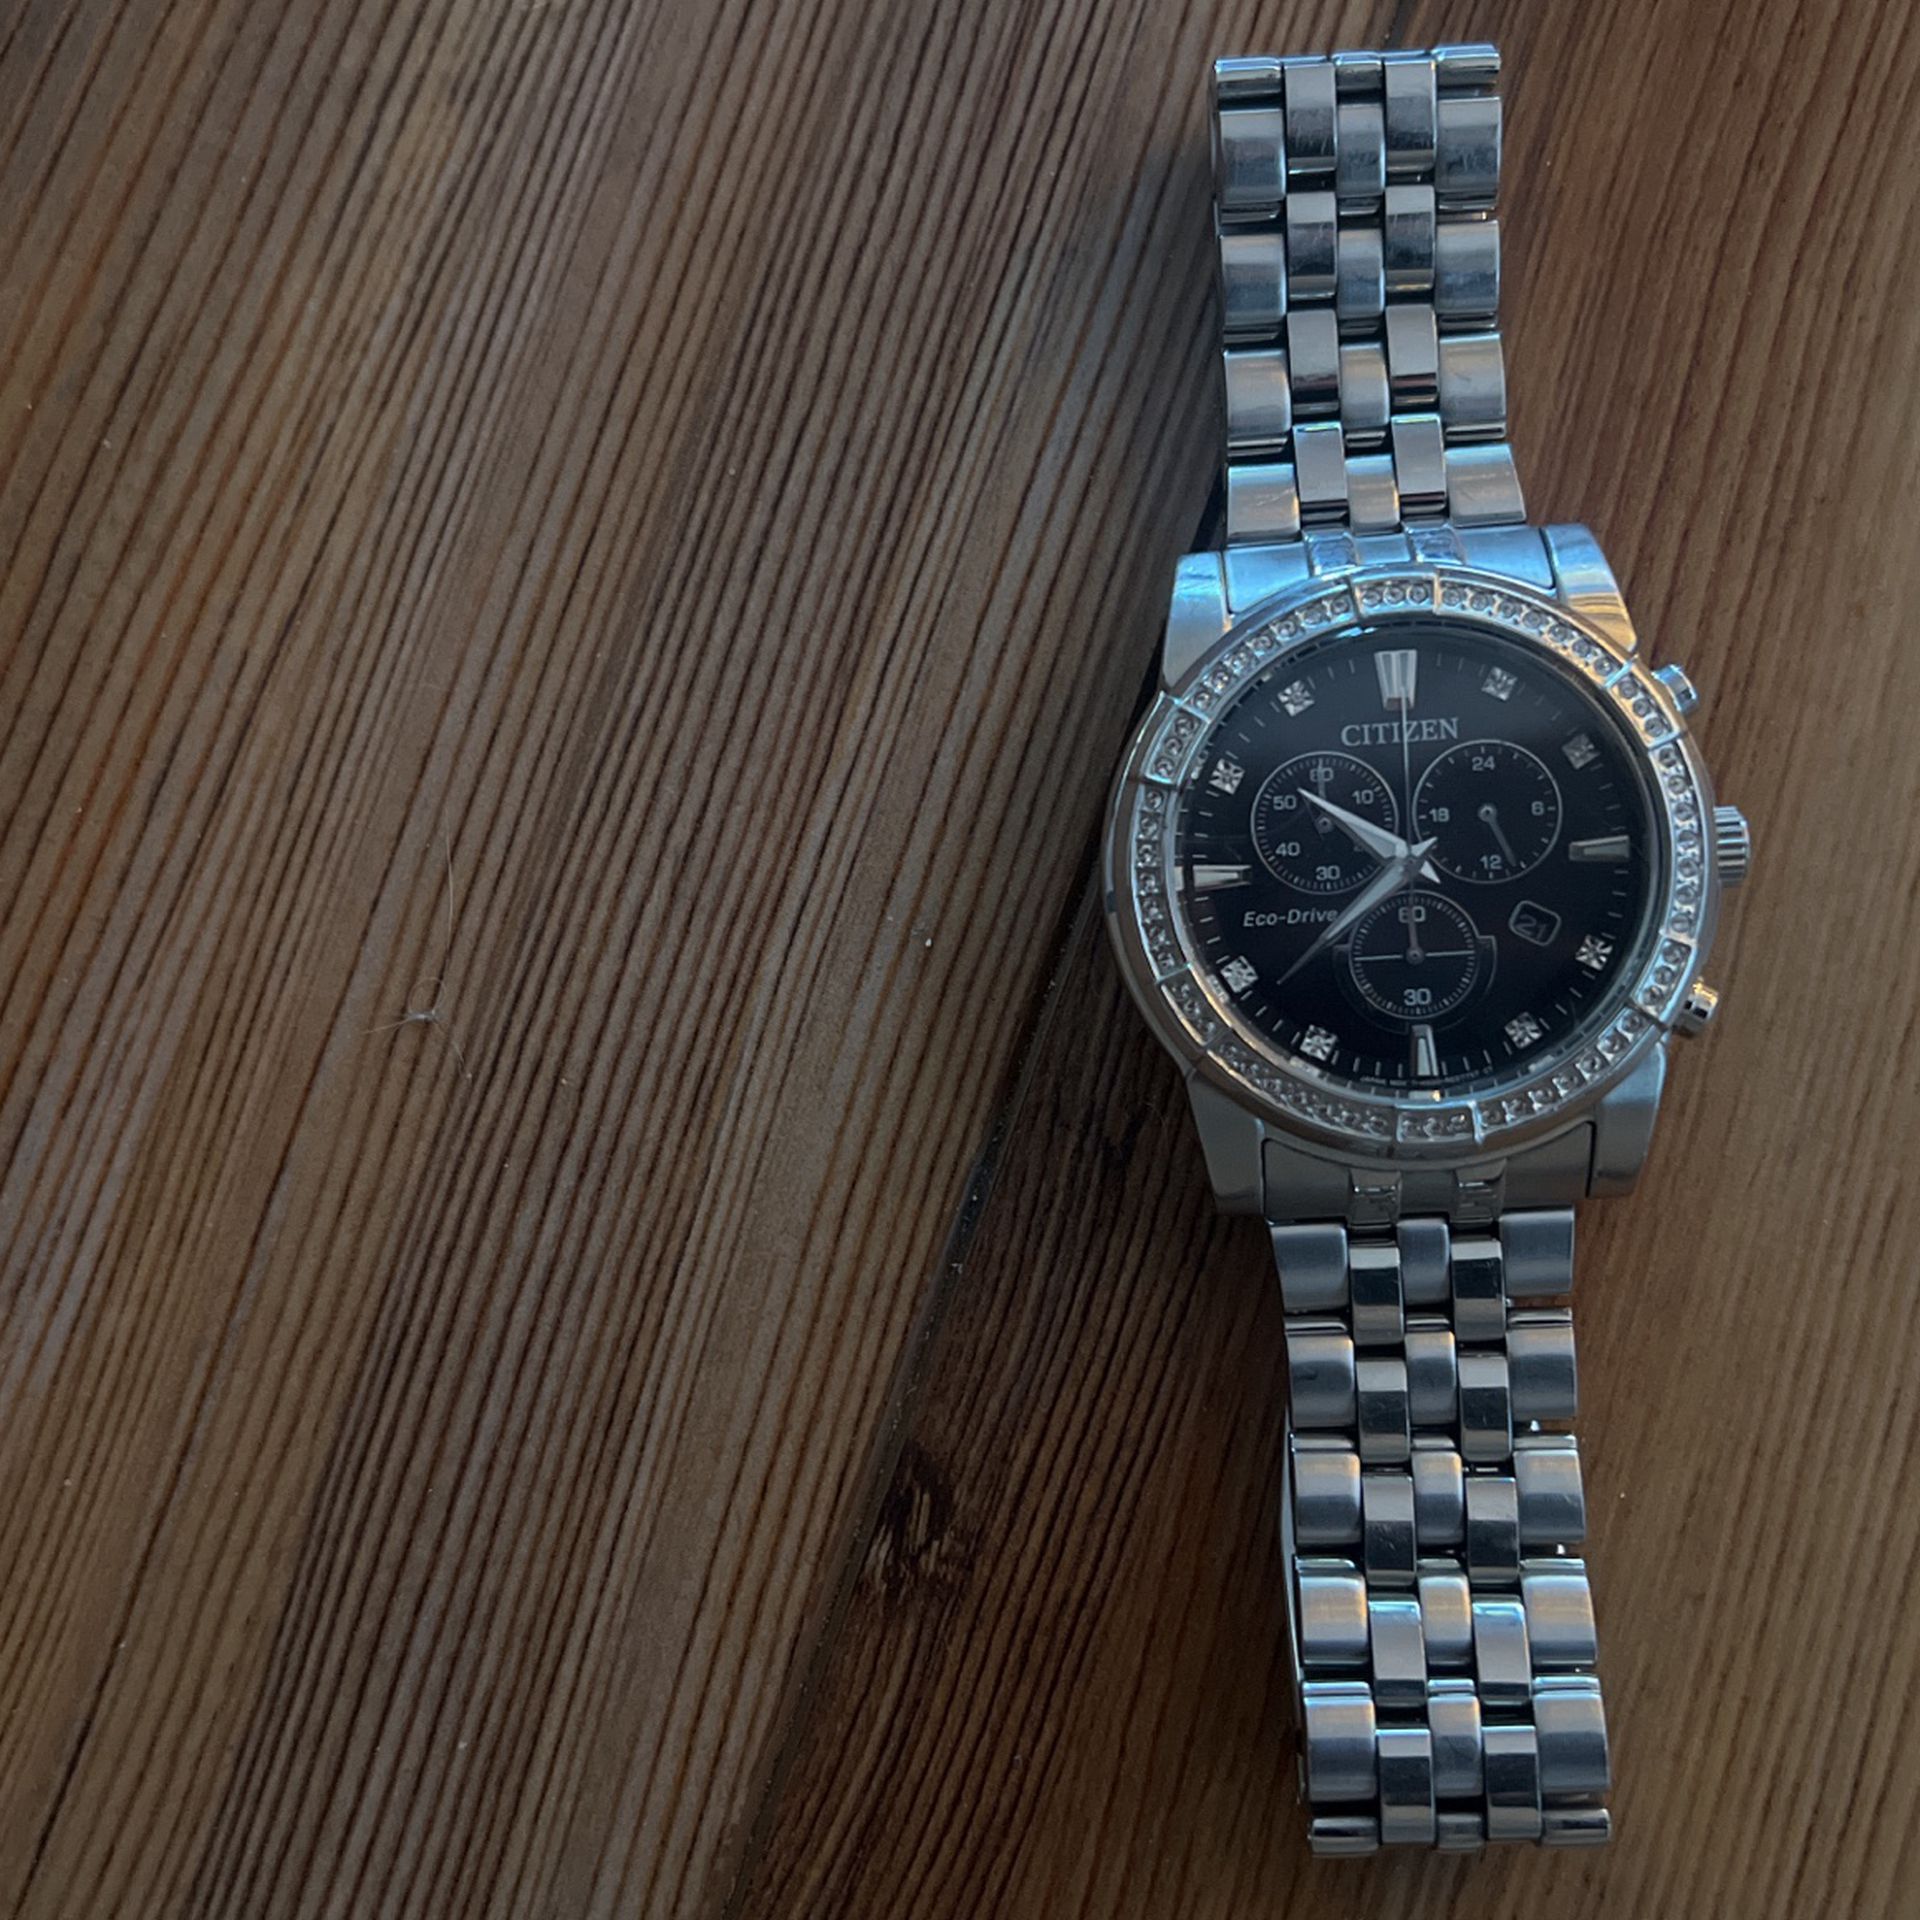 Limited Edition Citizen Watch W/ Real Crystal Encased Bezel